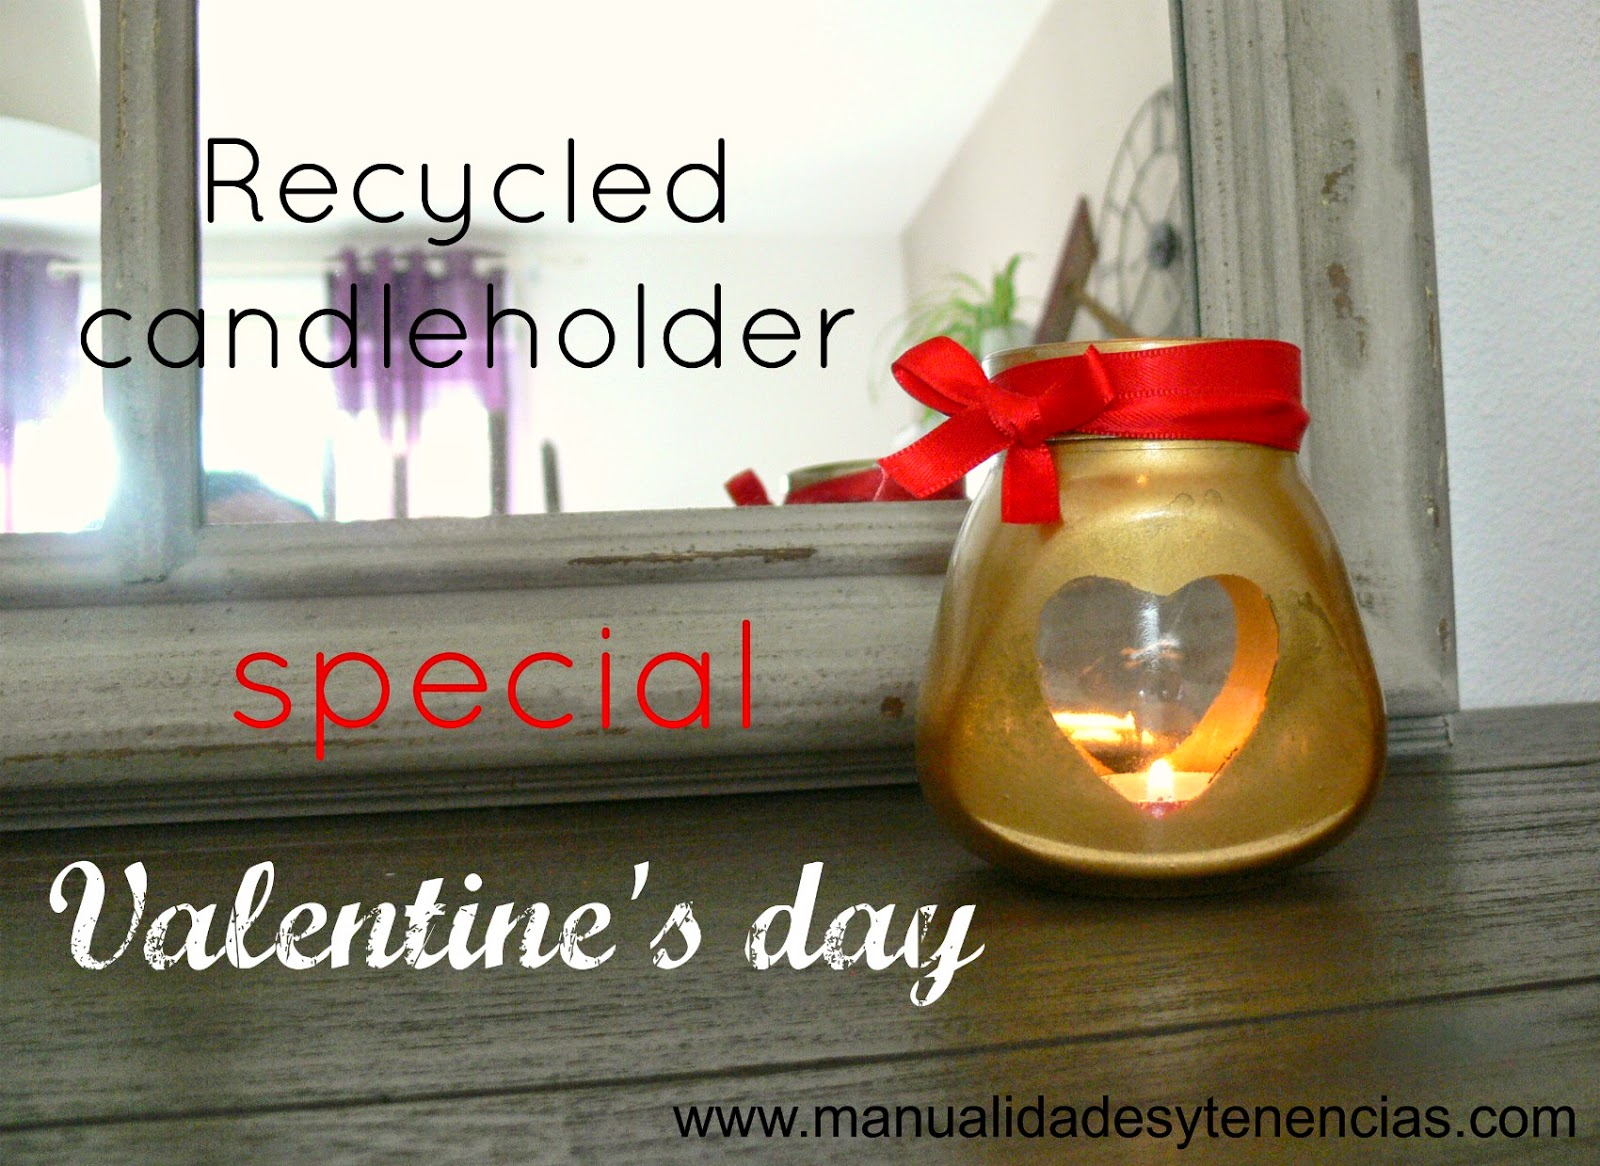 Recycled candle holder for Valentine's day